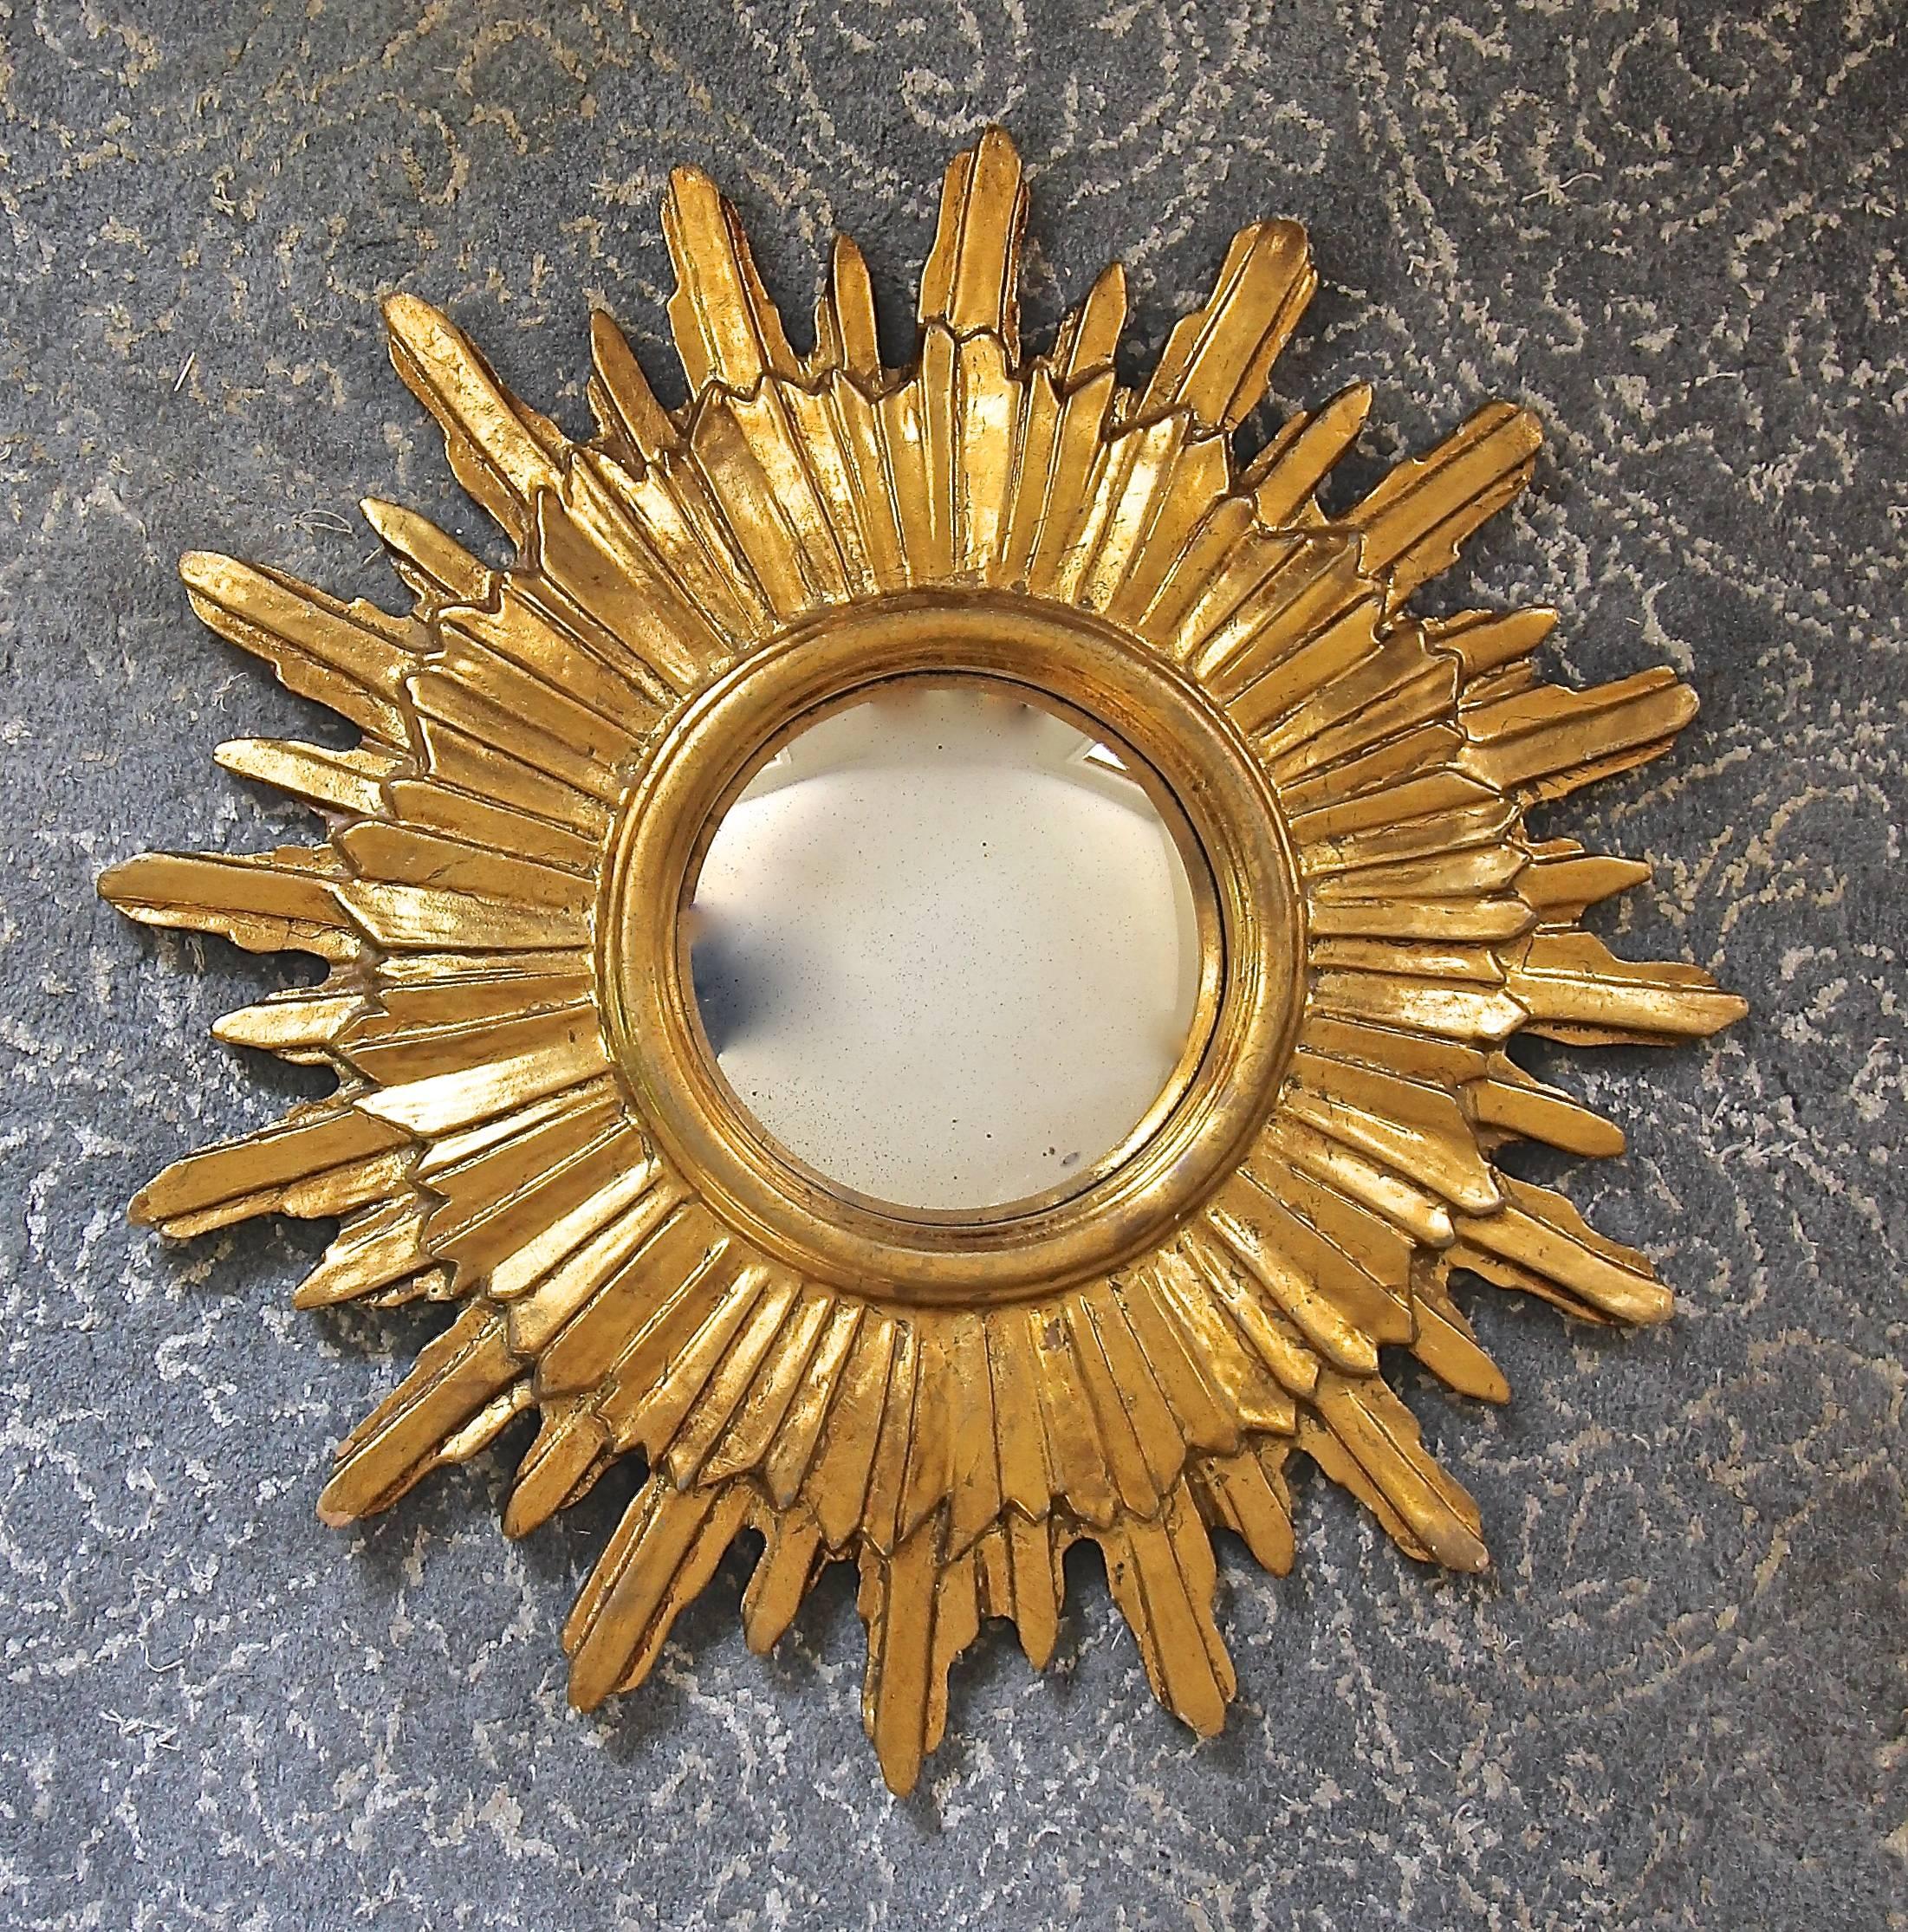 French style soleil giltwood wall mirror with convex inset mirror.